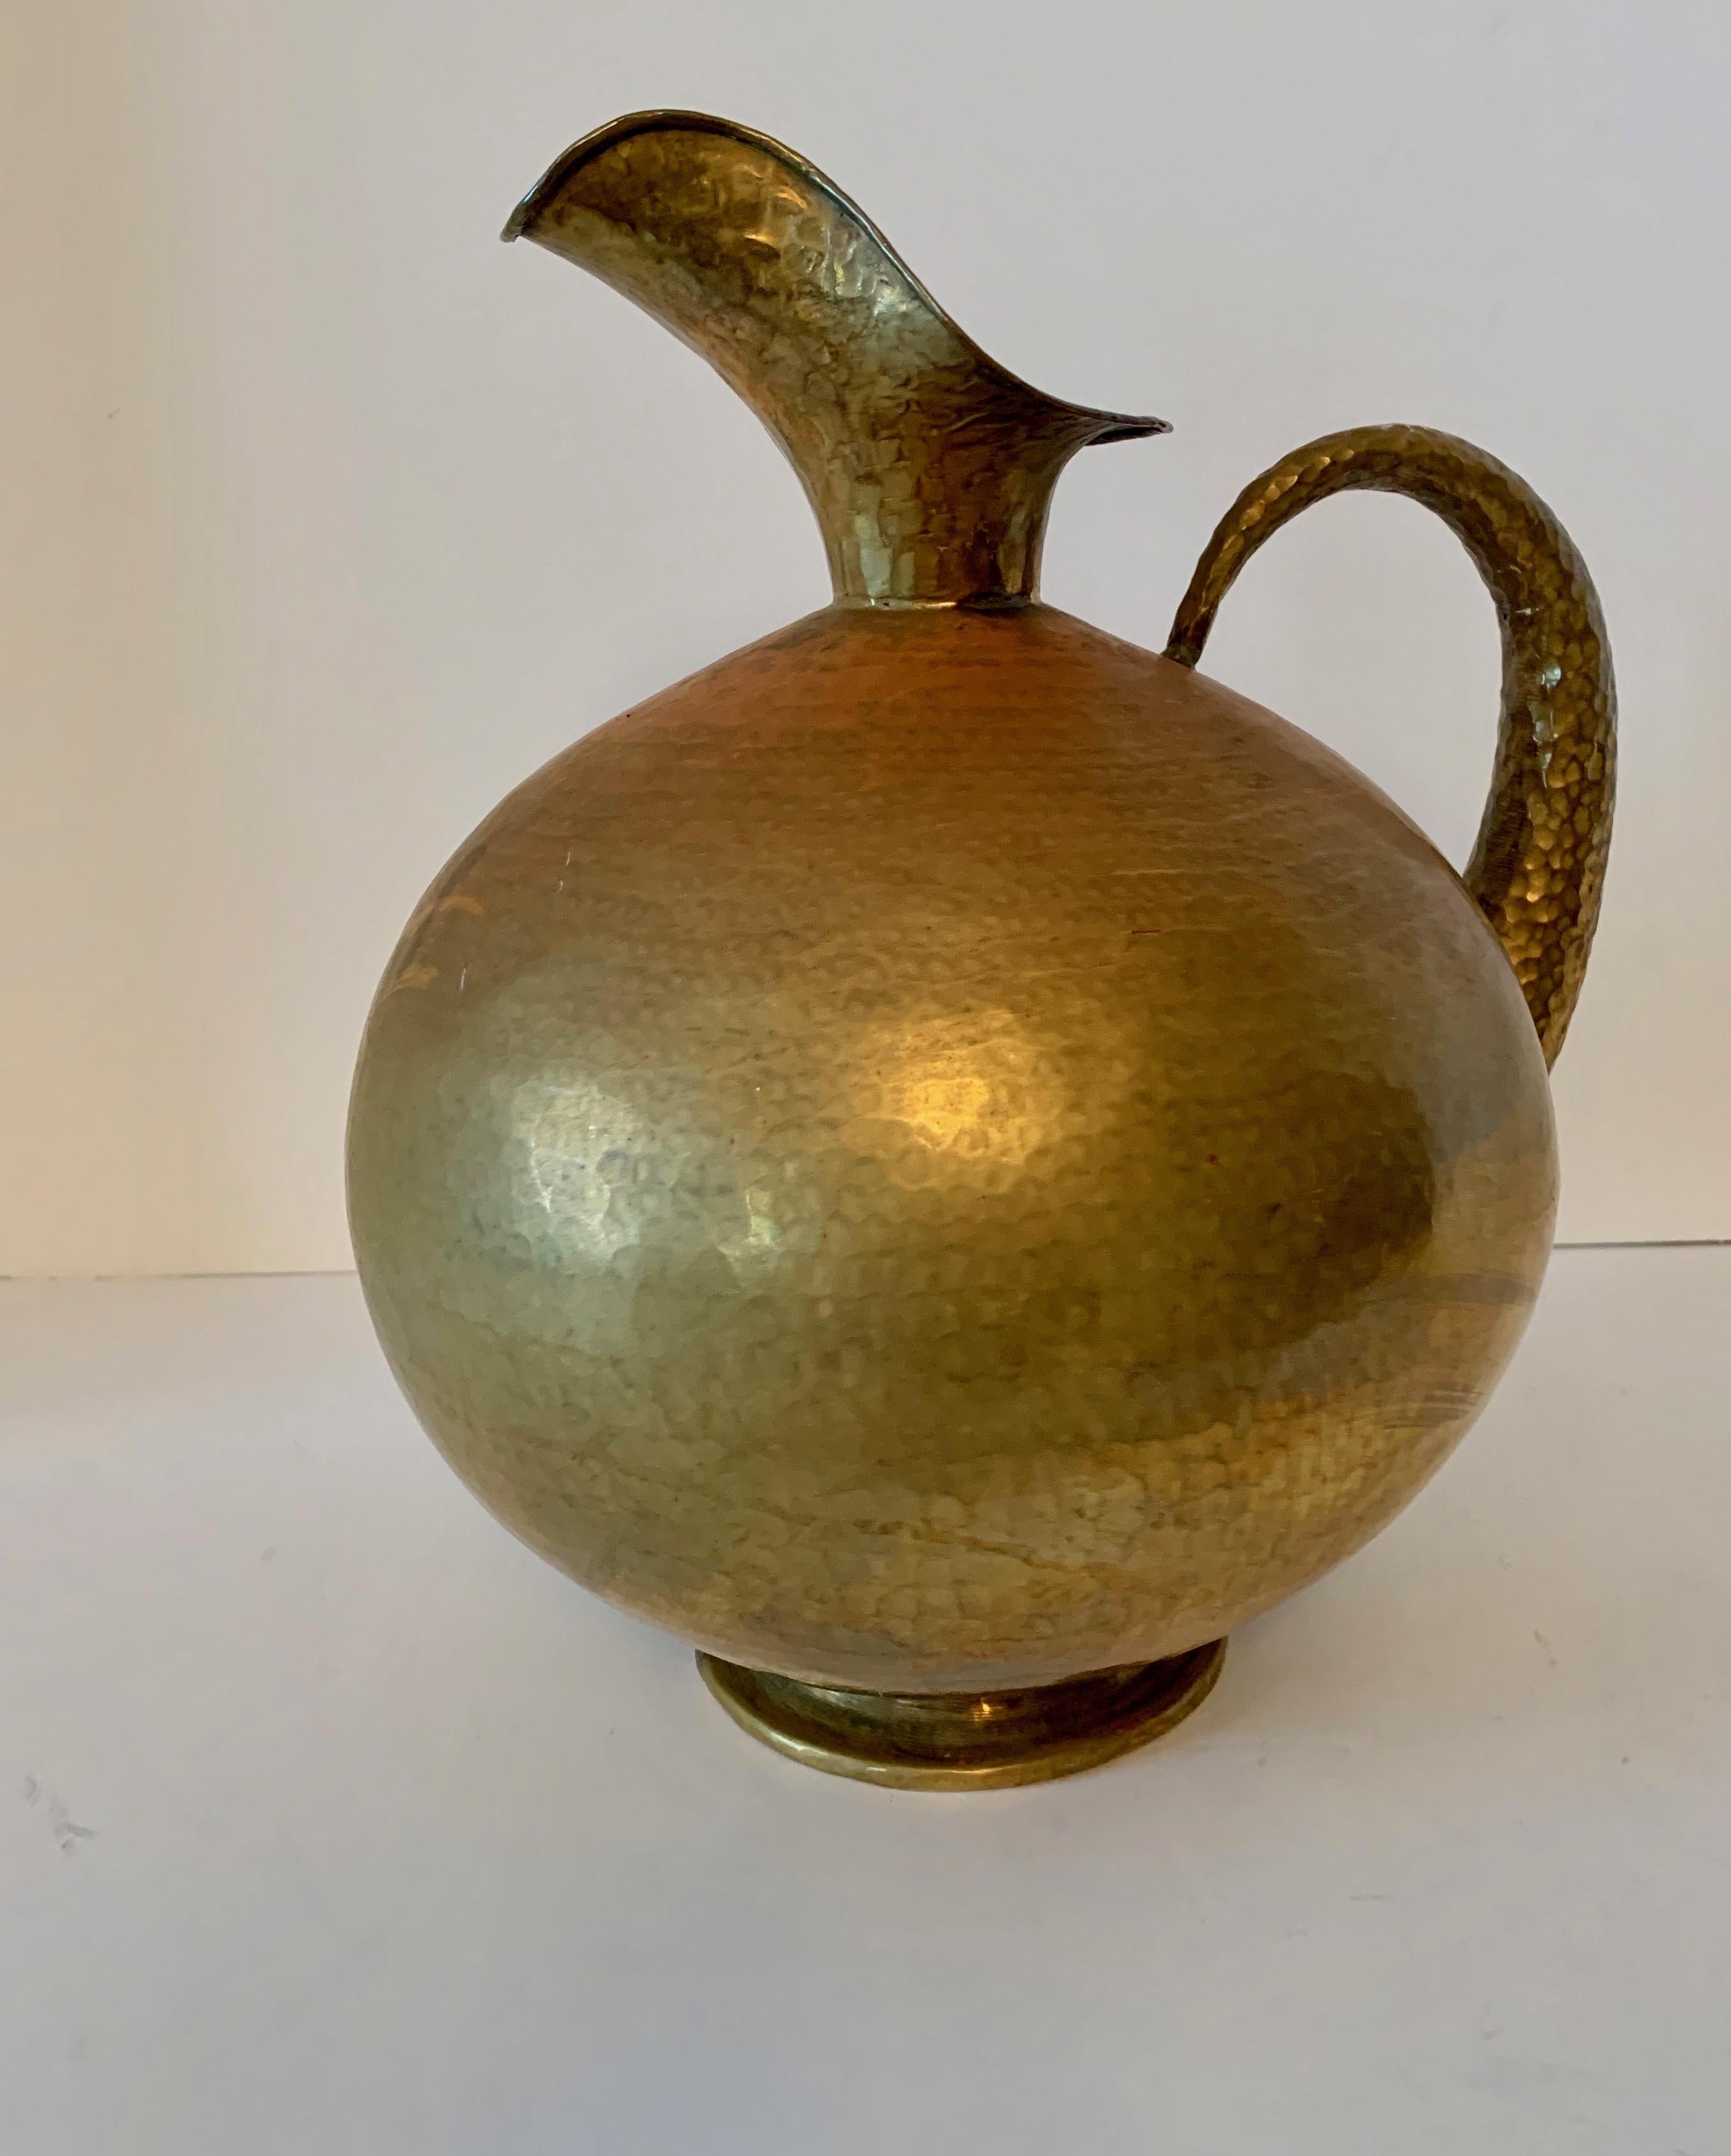 Hammered Italian brass urn pitcher signed Egidio Casagrande - Pitcher perfect, Architecturally stunning as a stand alone art piece, or an elegant addition to any setting, from picnics, dinner parties to watering plants! A special and important piece.